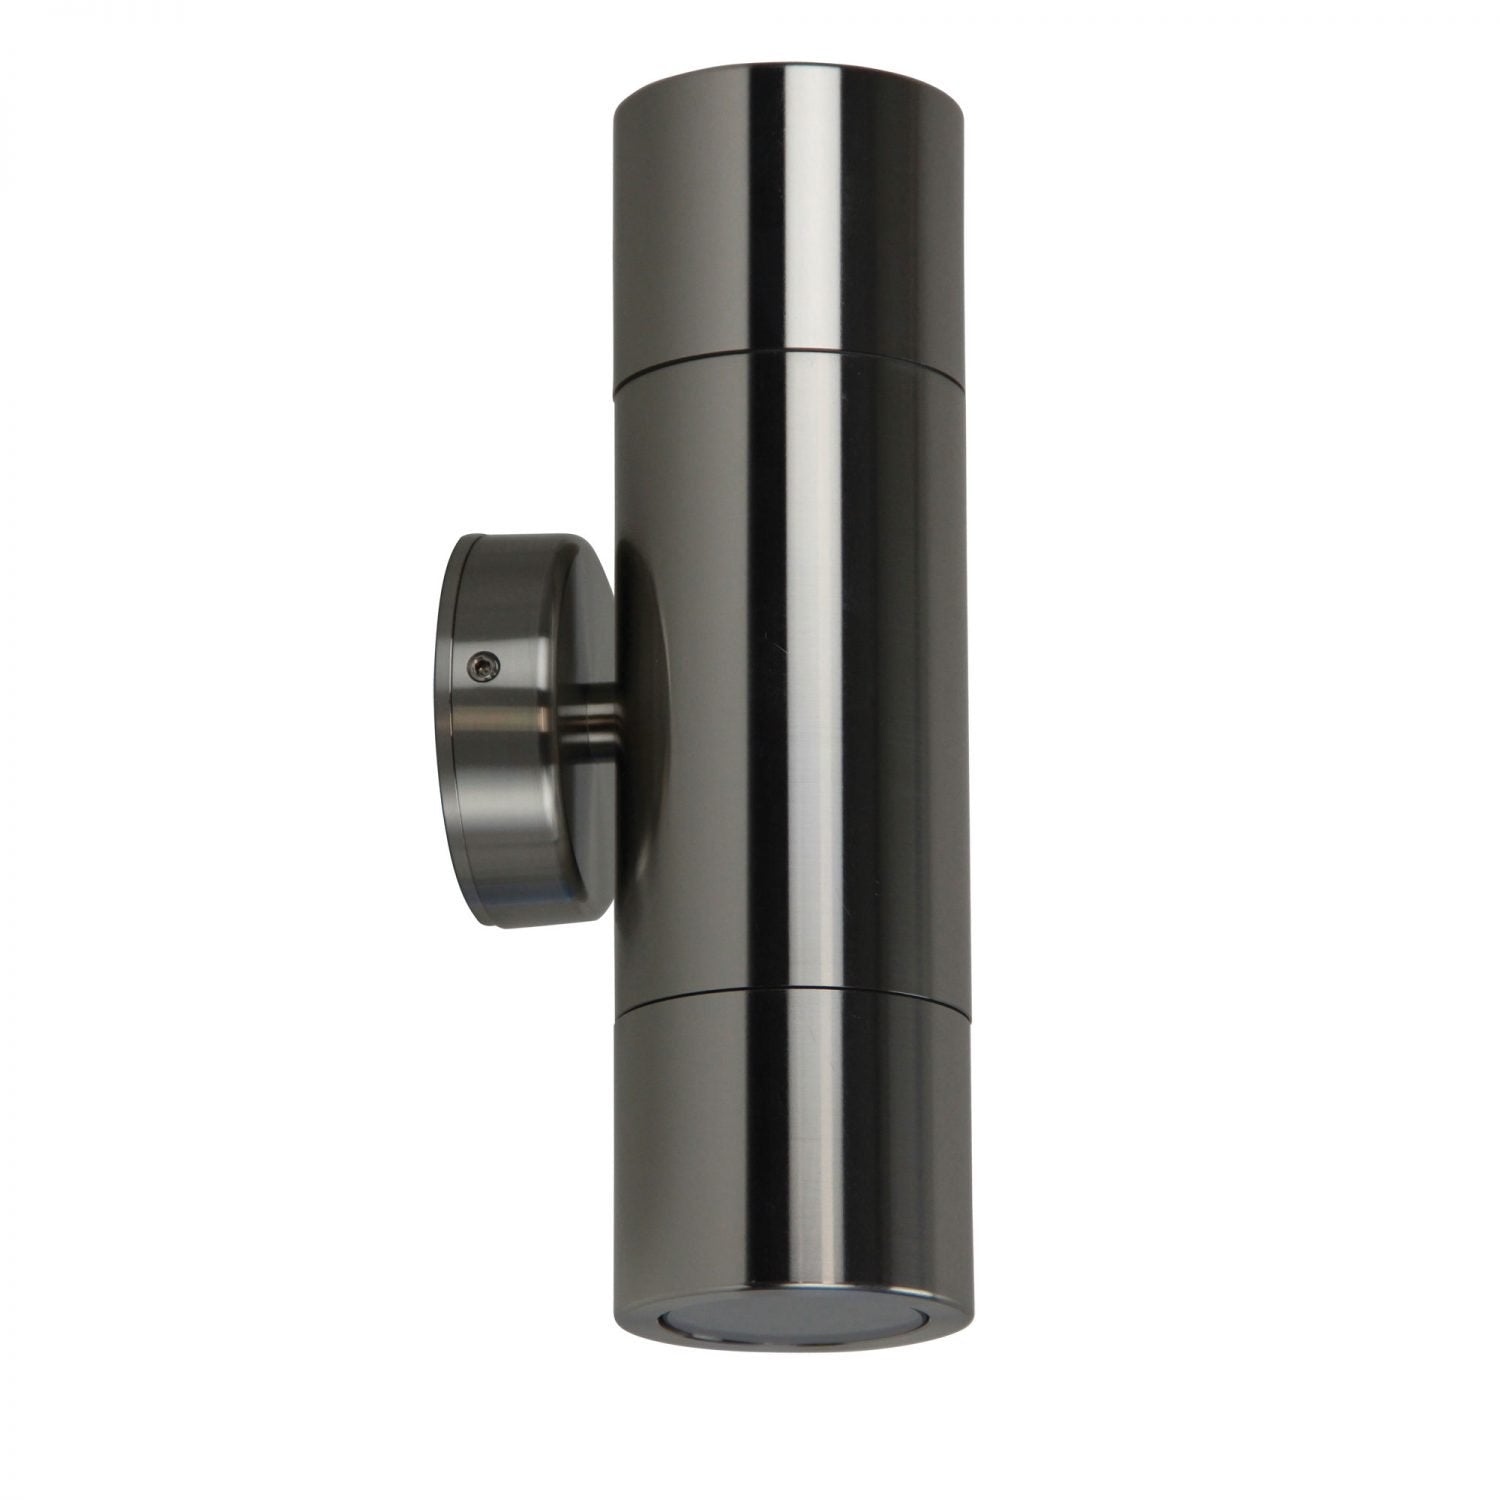 Oxley Up-Down Wall Light 316-Stainless Steel - UA7786SS